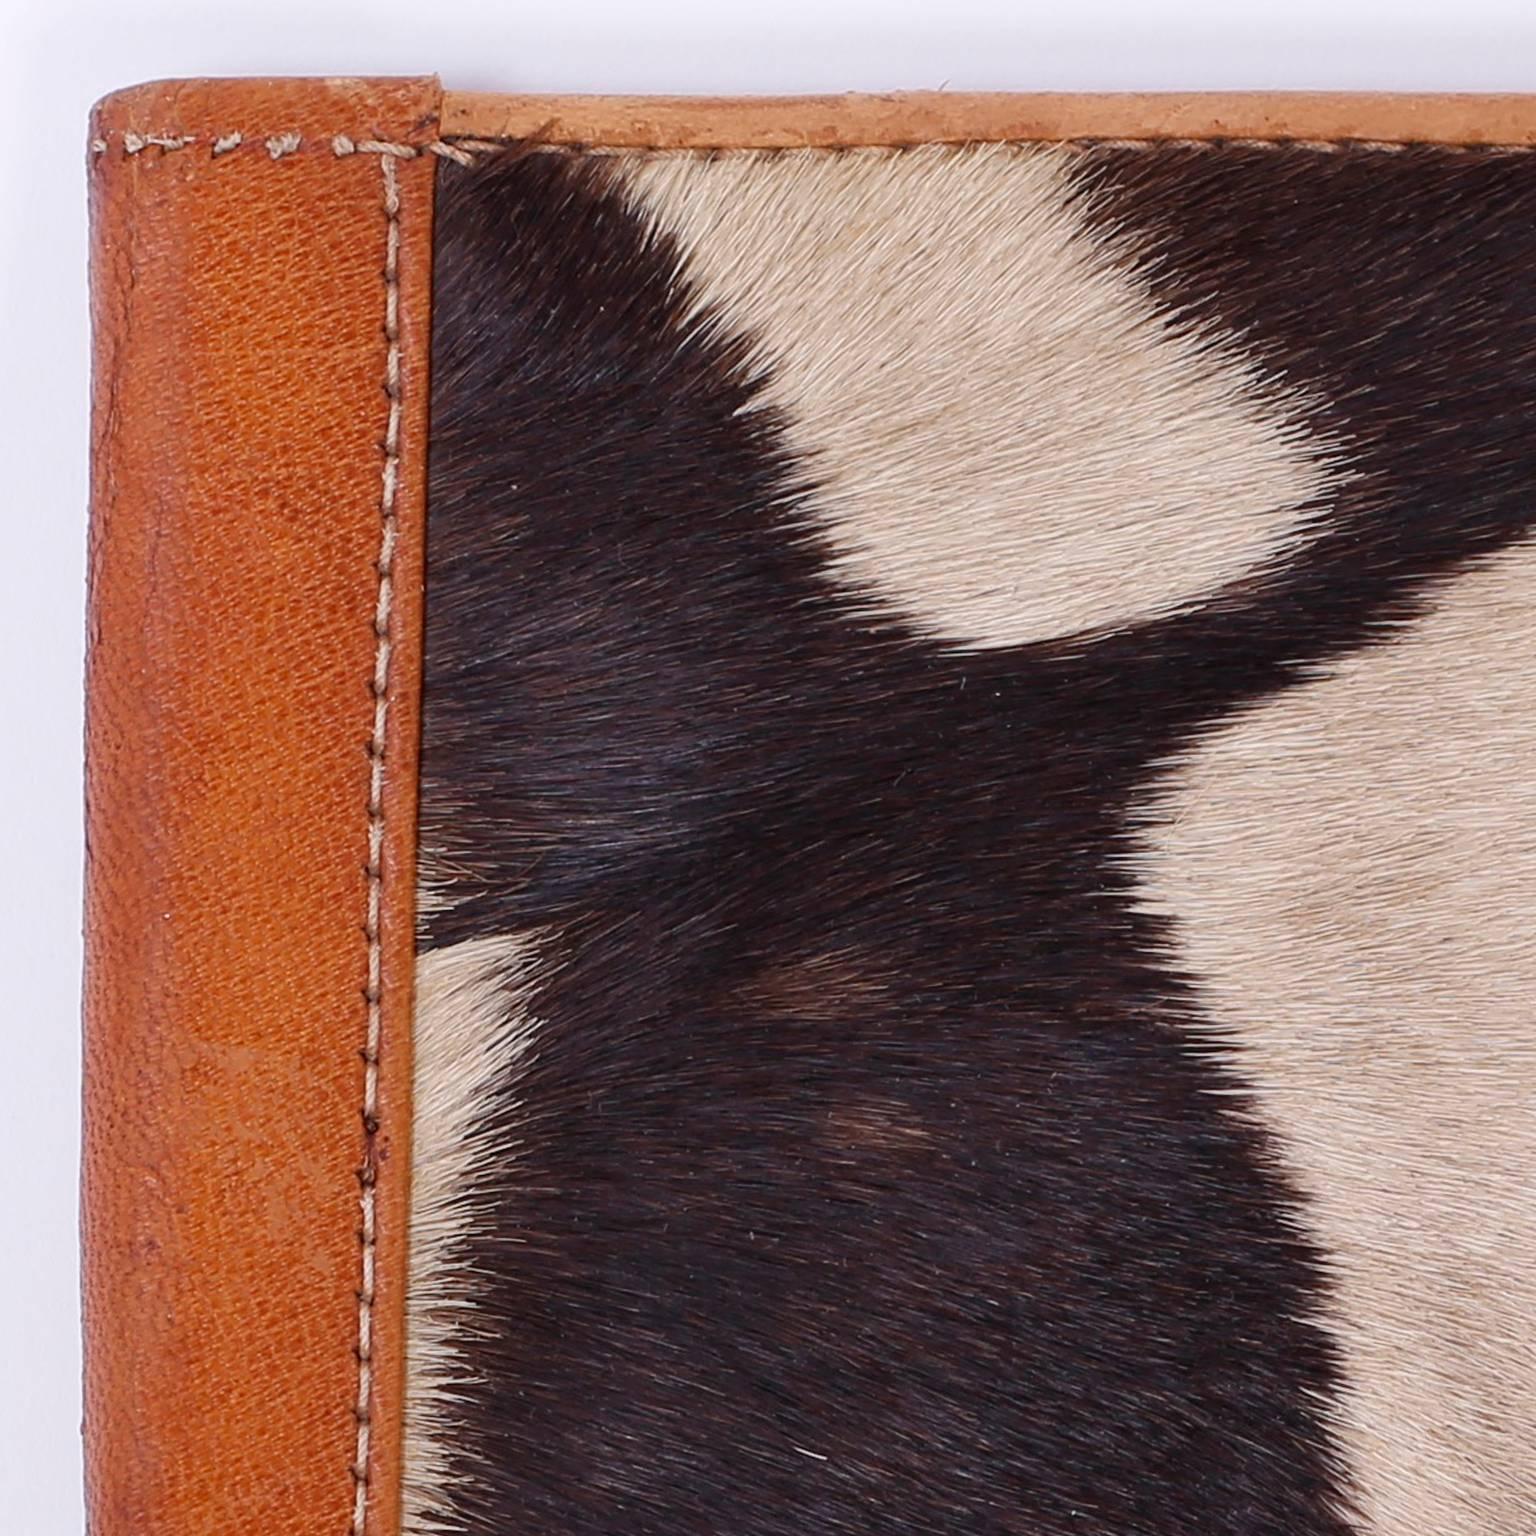 Swank, Mid-Century note pad cover crafted with zebra hide and soft tan leather. Cover can hold a cell phone in its pouch.

 